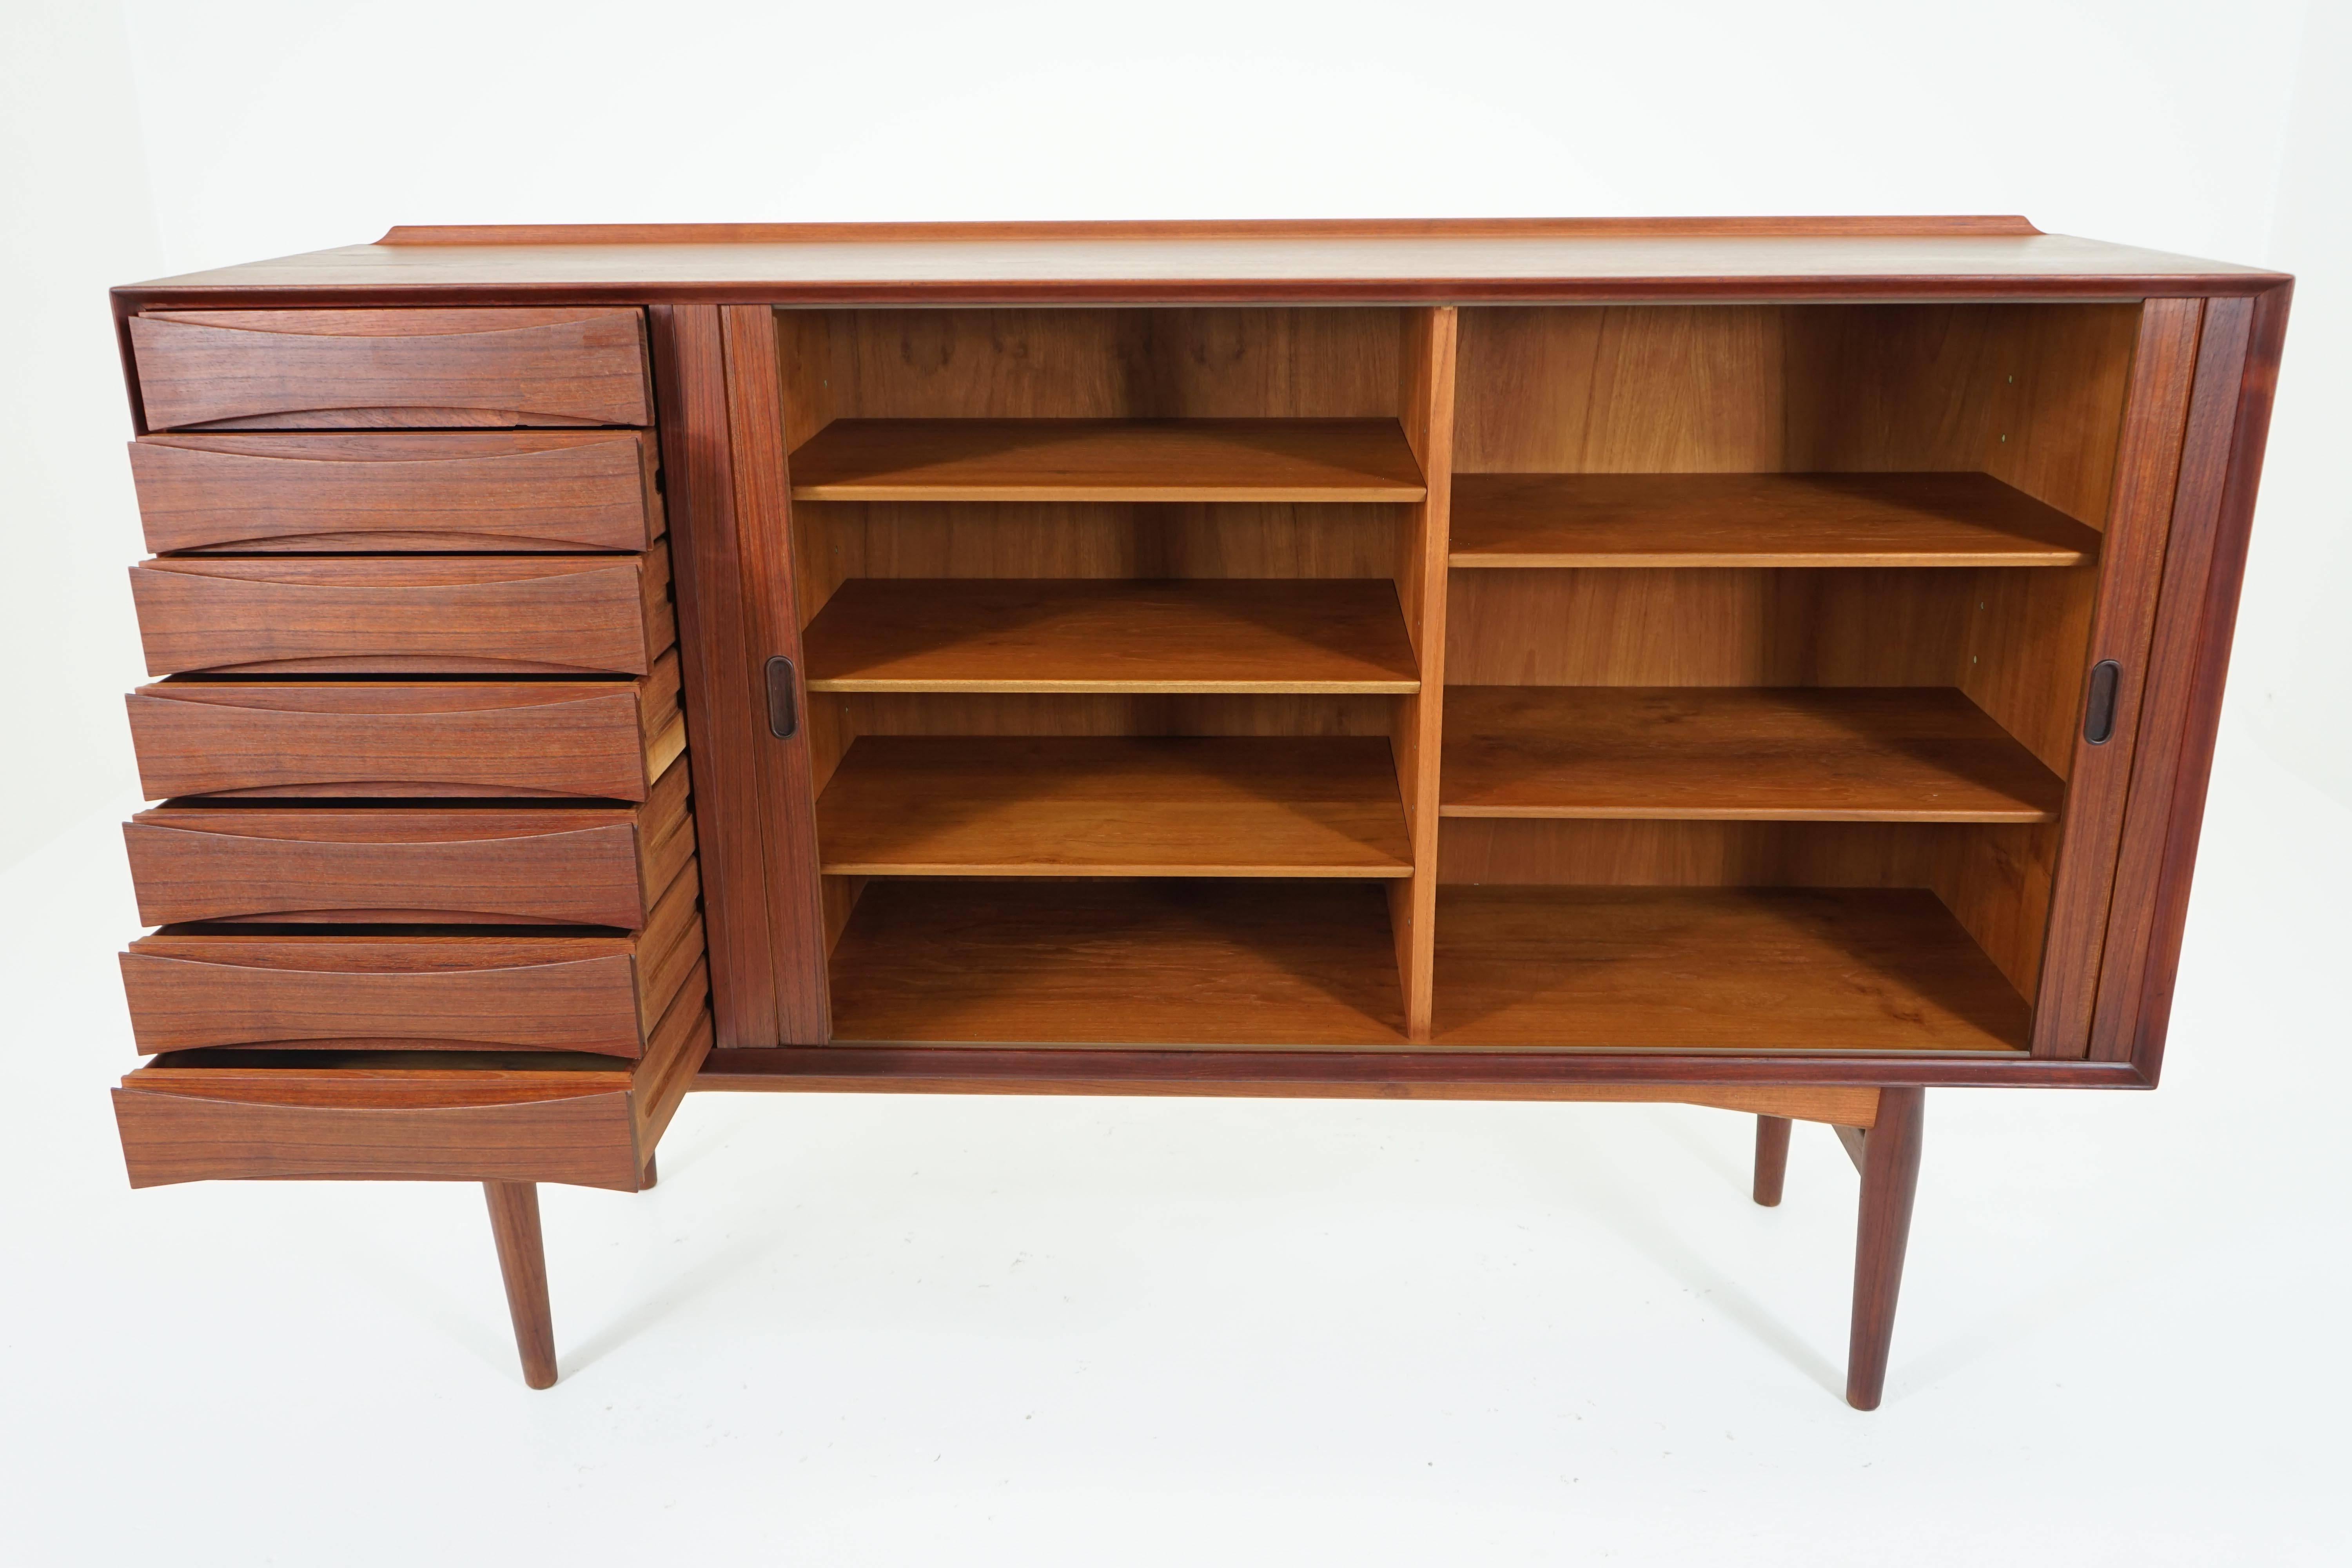 A beautiful solid teak and veneer sideboard by Arne Vodder for Sibast. Seven drawers and large cabinet with adjustable shelving. Original finish, made in Denmark, circa 1958.